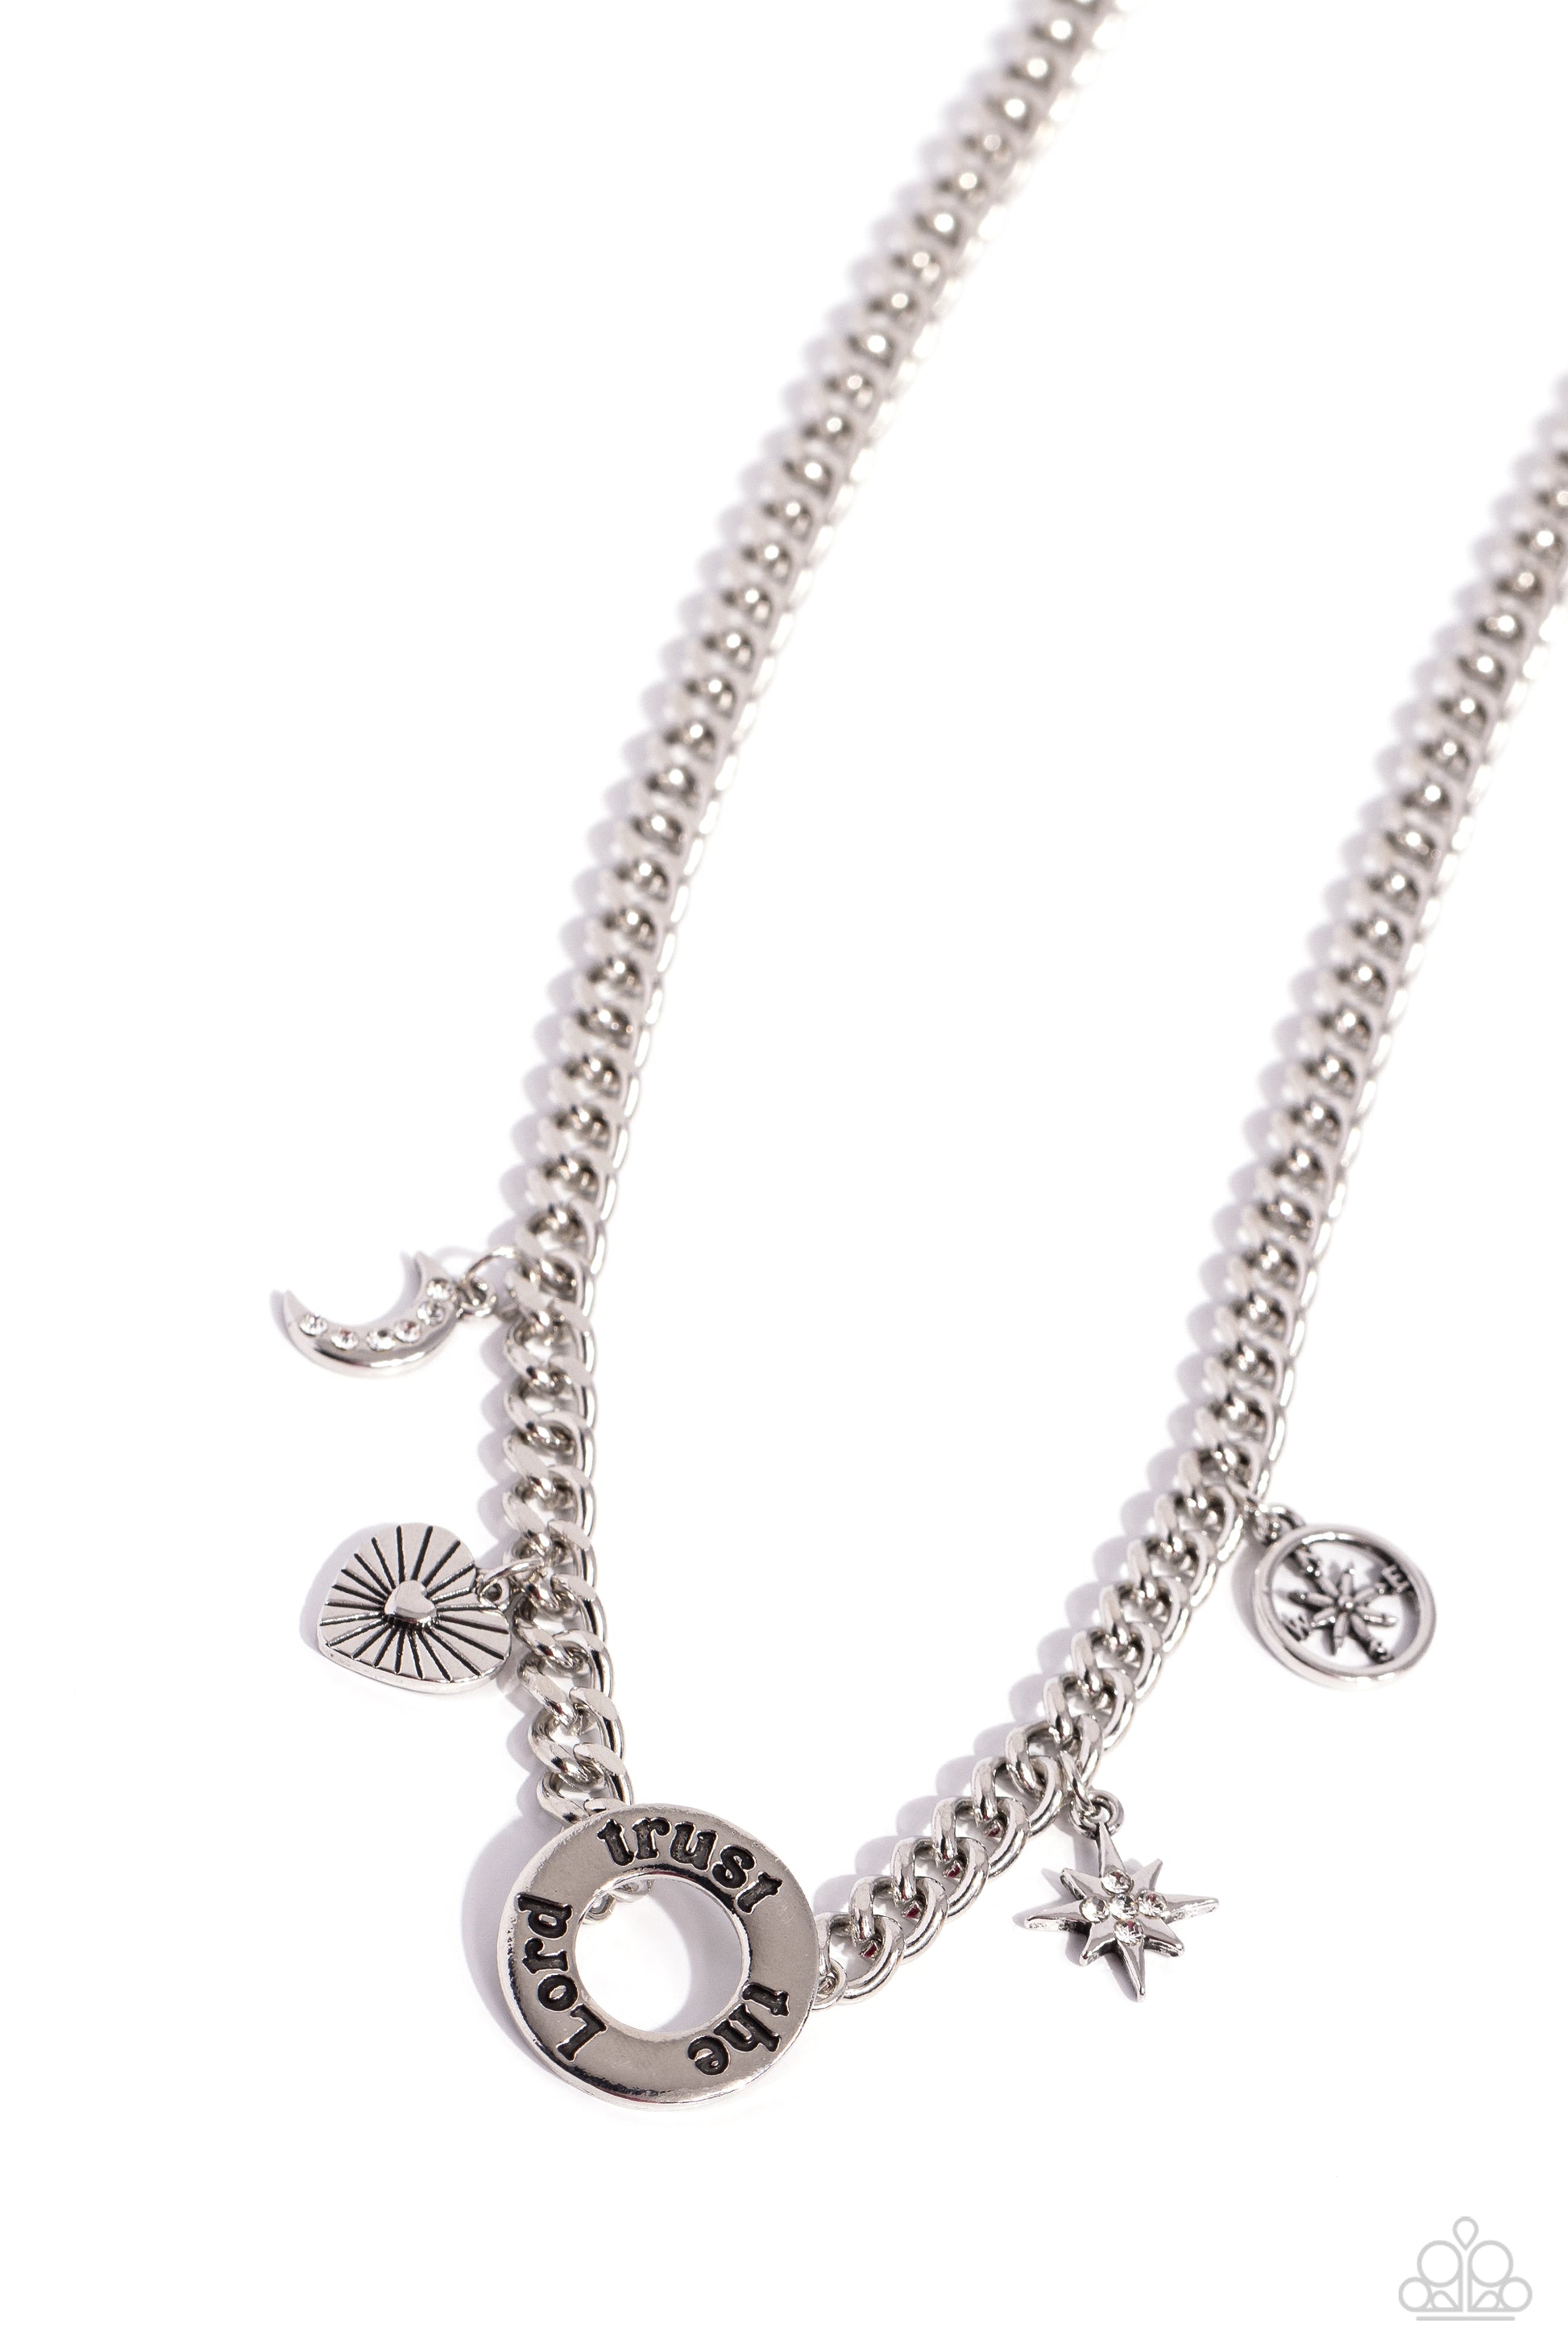 Trust in Miracles White Inspirational Necklace - Paparazzi Accessories  Dangling from a thick silver chain, a collection of silver charms, including a compass, a star embellished in white rhinestones, a crescent moon embellished in white rhinestones, a linear-textured heart, and a disc stamped with the phrase "Trust the Lord" encircles the neckline for an inspirational statement. Features an adjustable clasp closure.